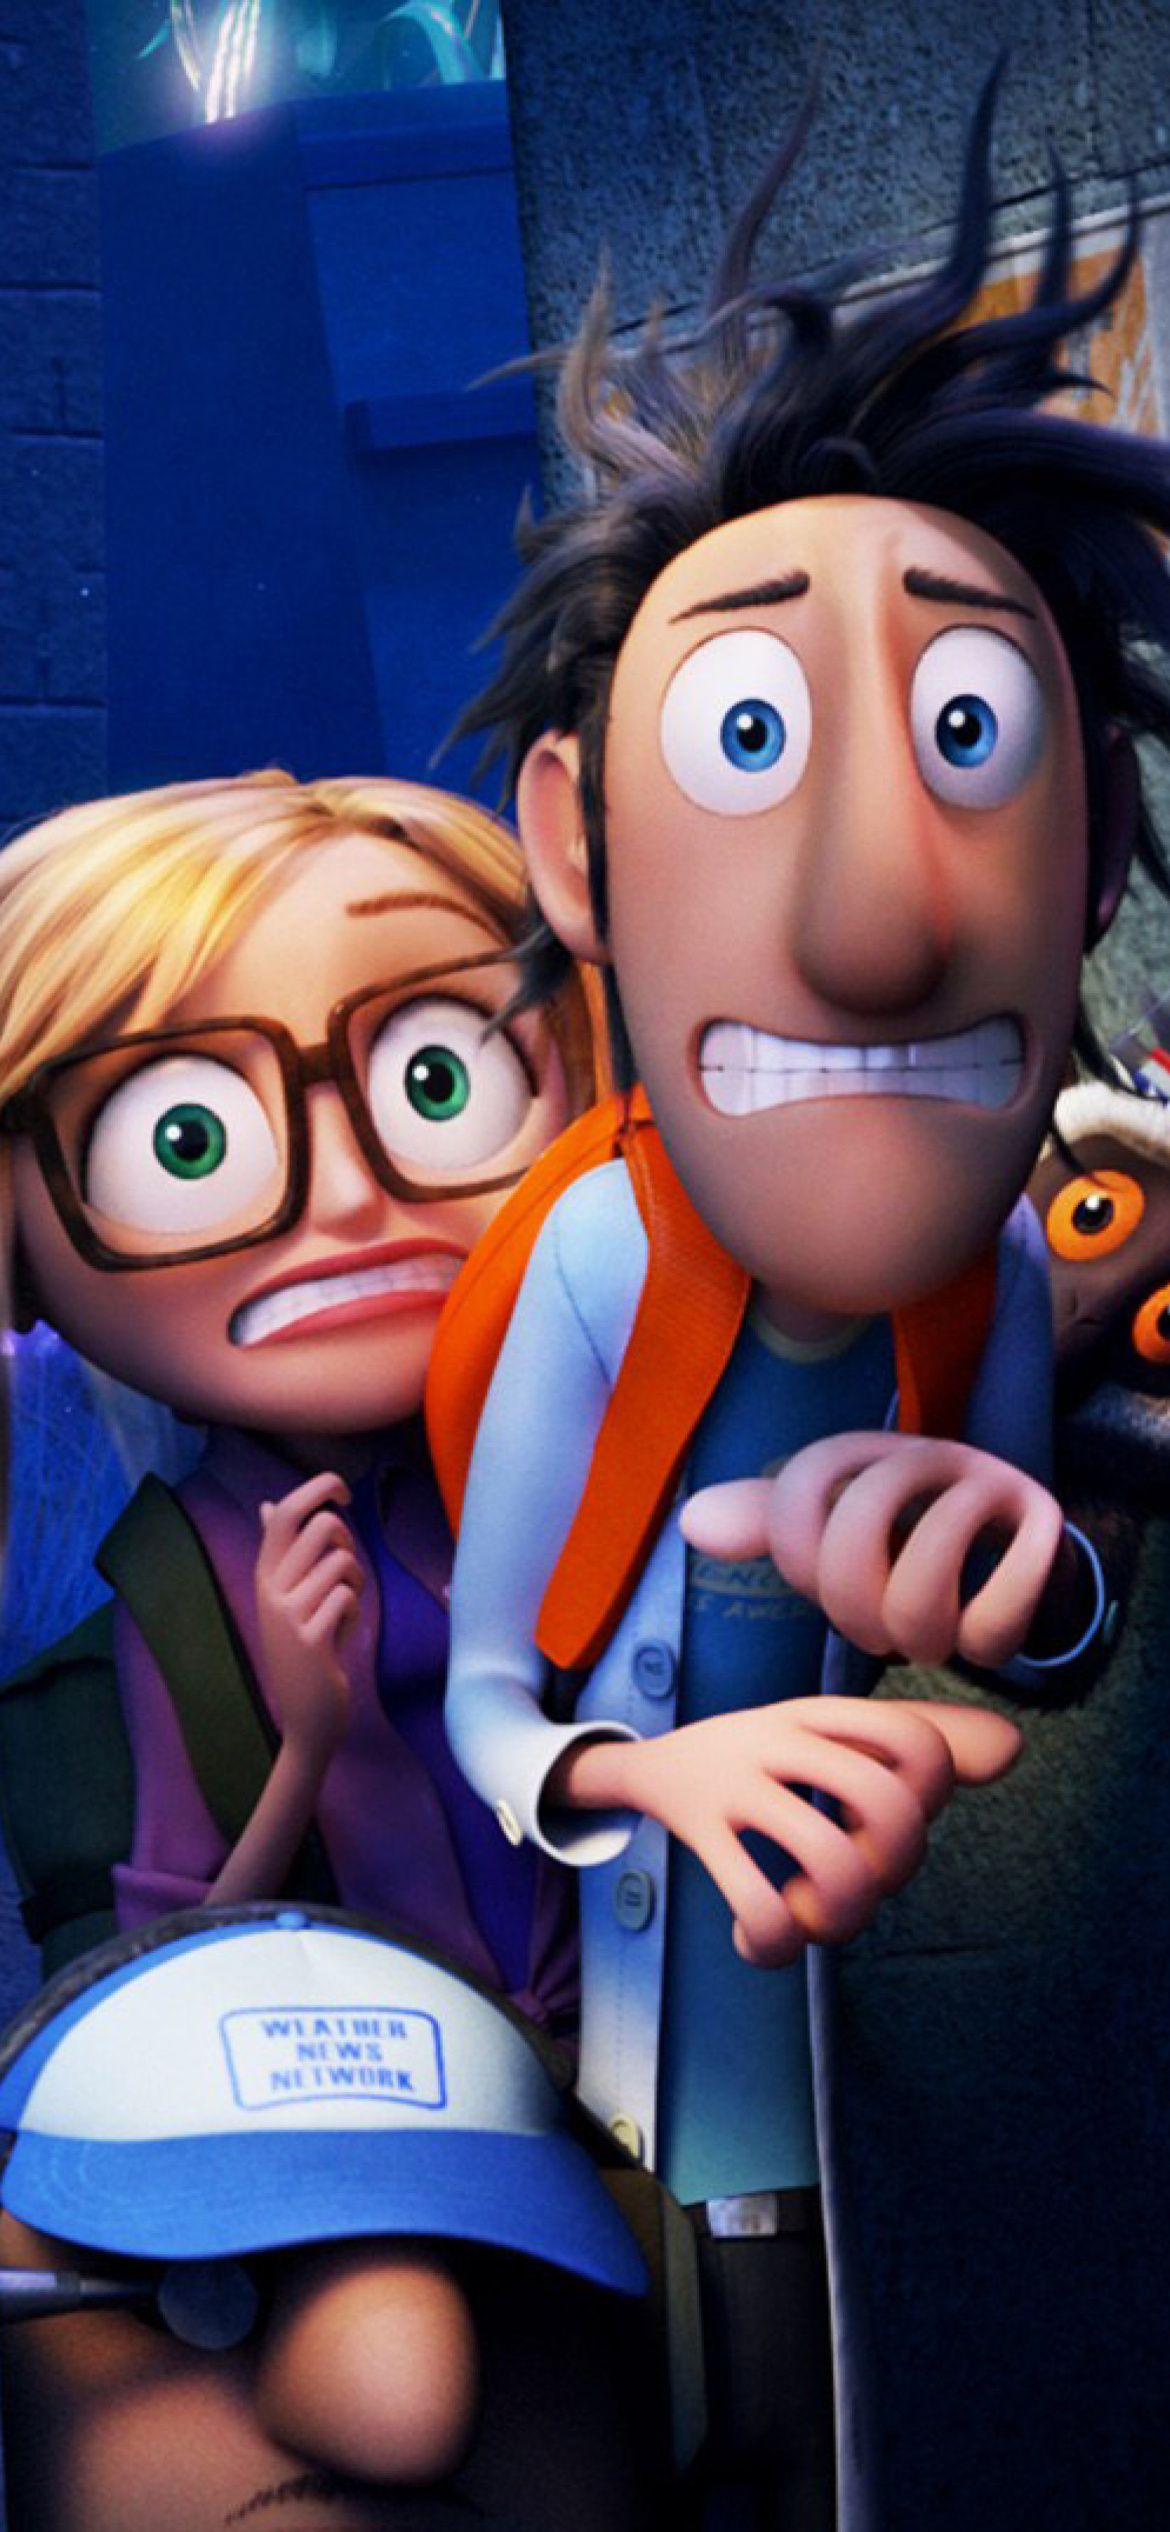 Cloudy with a Chance of Meatballs 2 wallpaper 1170x2532